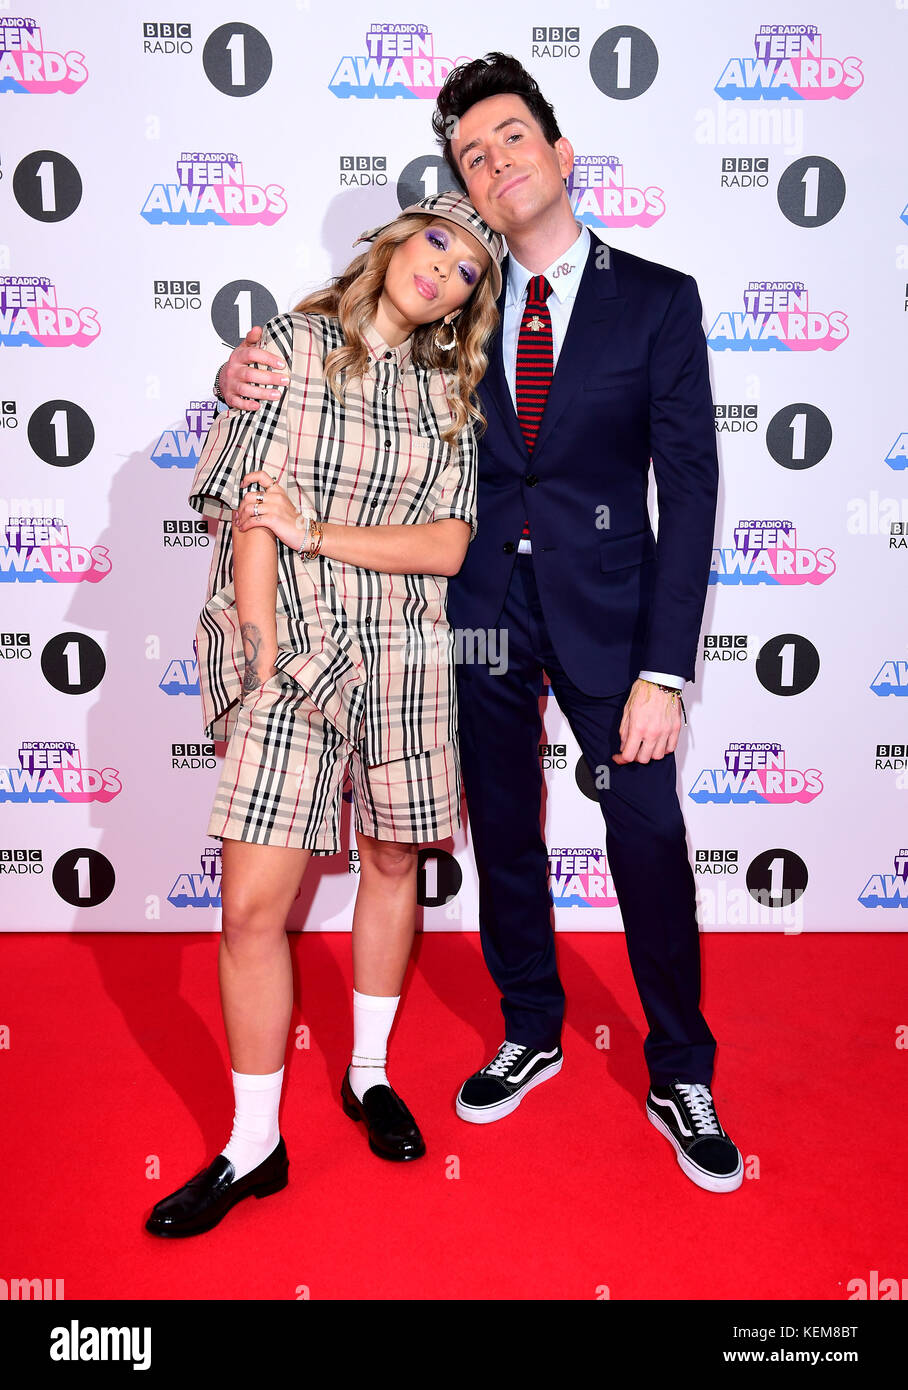 Rita Ora and Nick Grimshaw attending BBC Radio 1's Teen Awards, at the SSE Arena, Wembley, London. Stock Photo